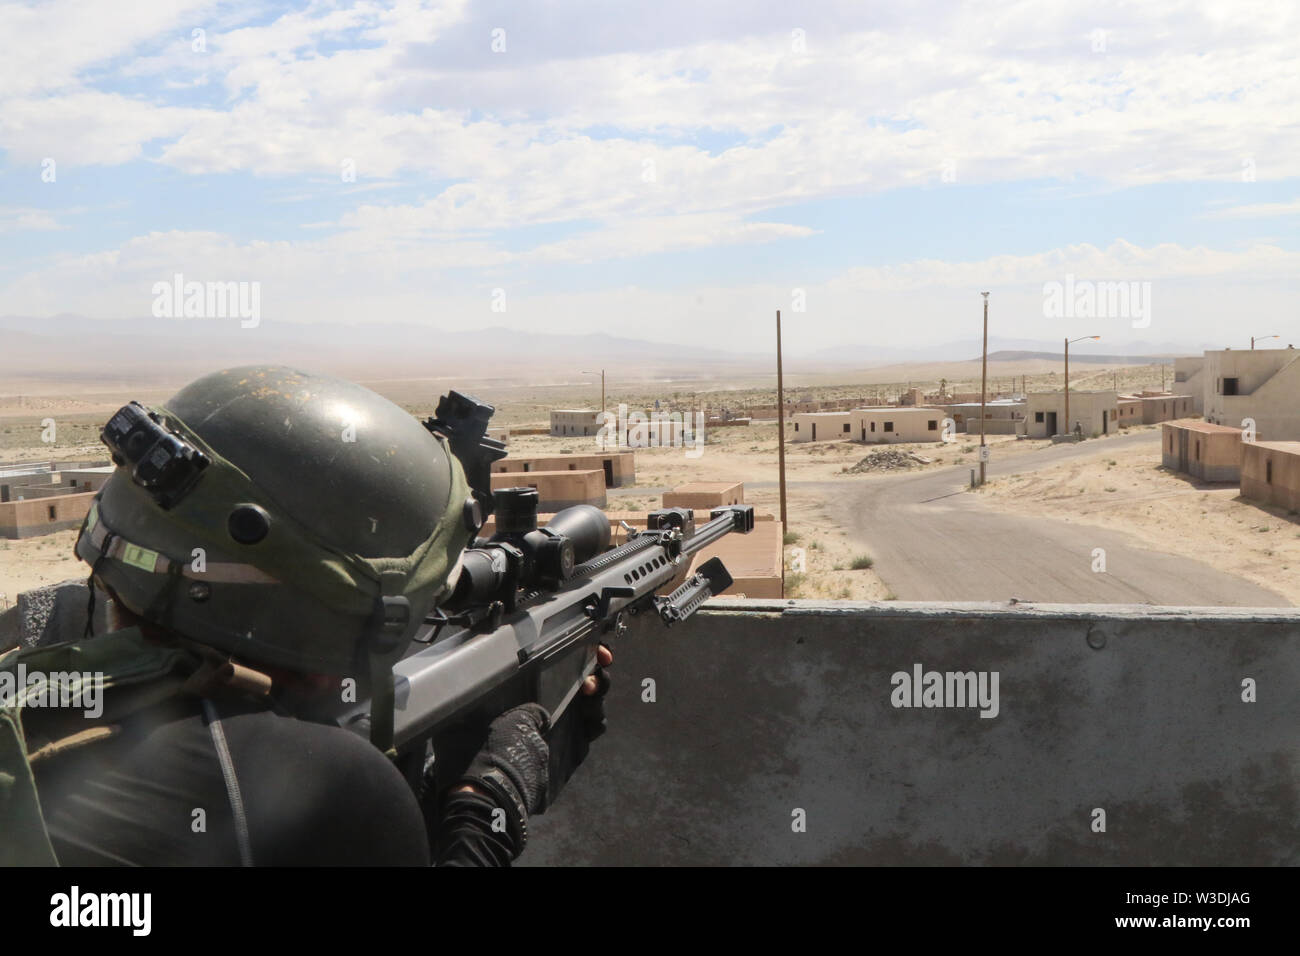 An 11th Armored Cavalry Regiment Trooper surveys the battlefield with a simulated Barrett M107 .50 caliber Sniper Rifle in the city of Razish, National Training Center, Fort Irwin, Calif., on July 12th, 2019. This mission tested the 30th ABCT’s ability to react under fire while maneuvering through a controlled city.  (U.S. Army photo by PV2 James Newsome) Stock Photo